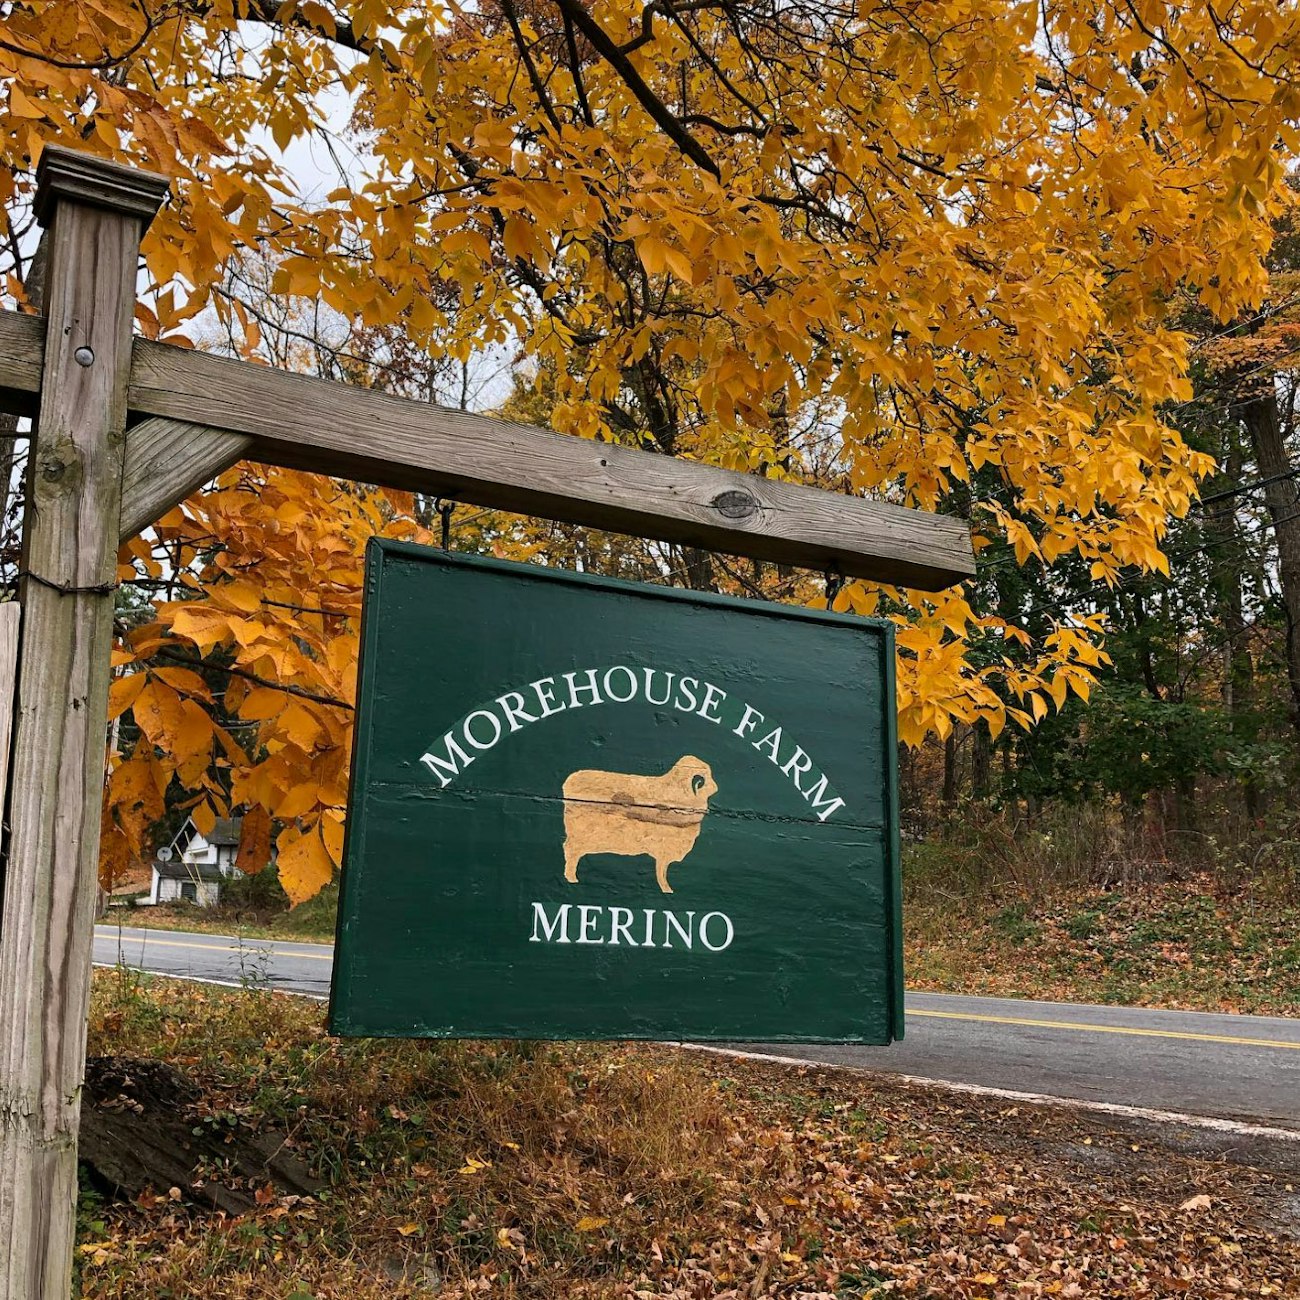 Green sign saying Morehouse Farm Merino against fall leaves next to a road